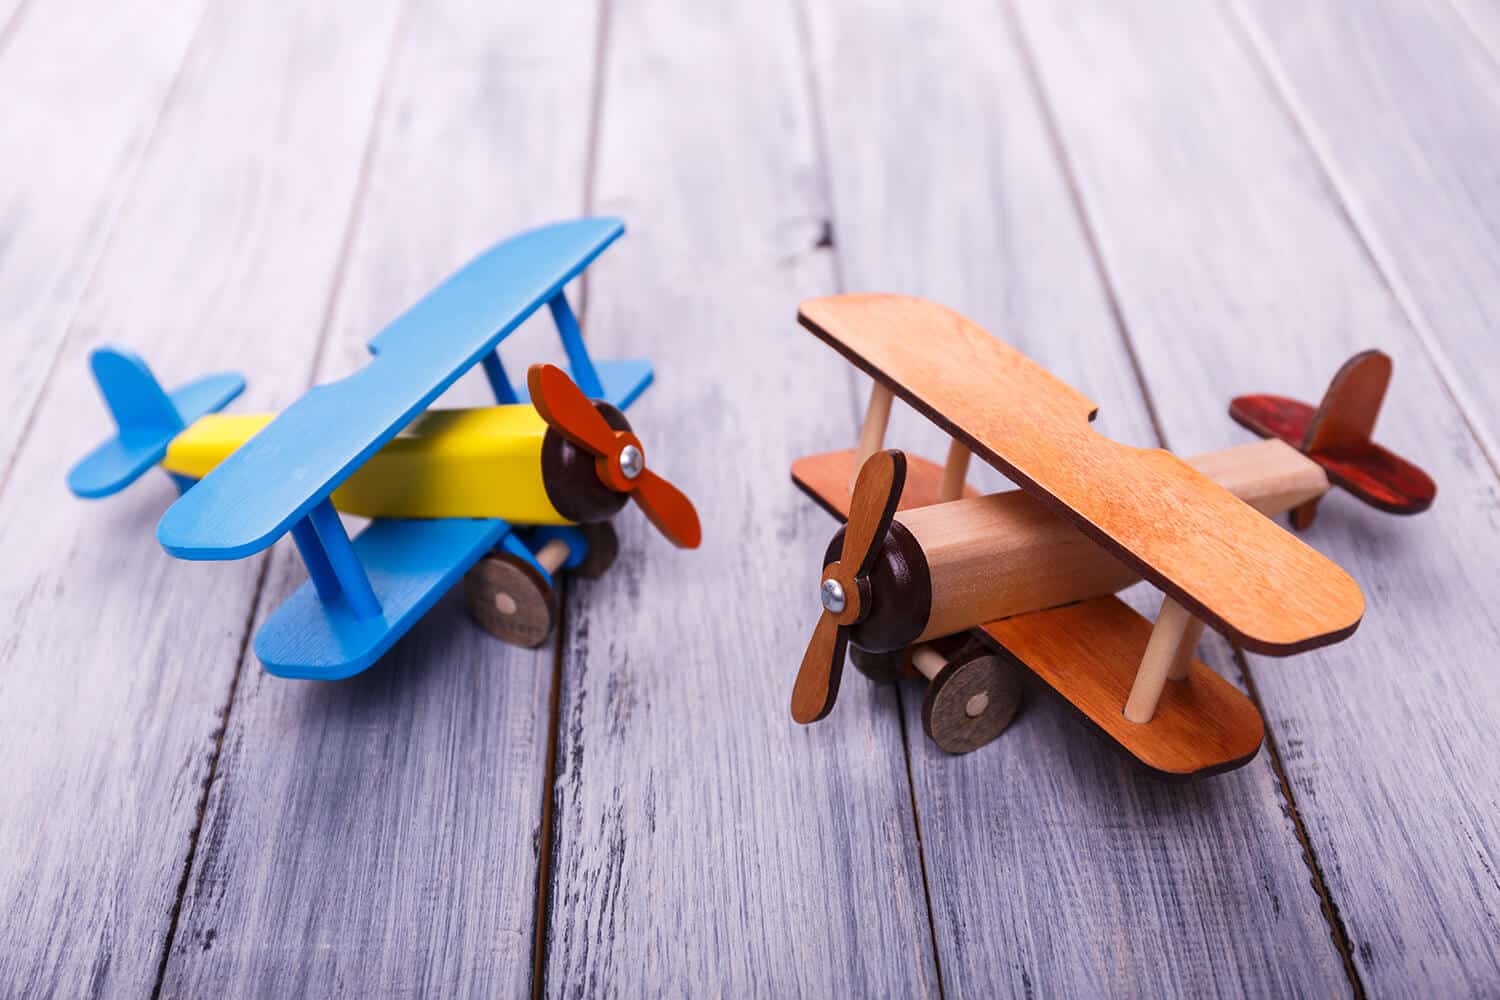 Building and selling wooden toys online